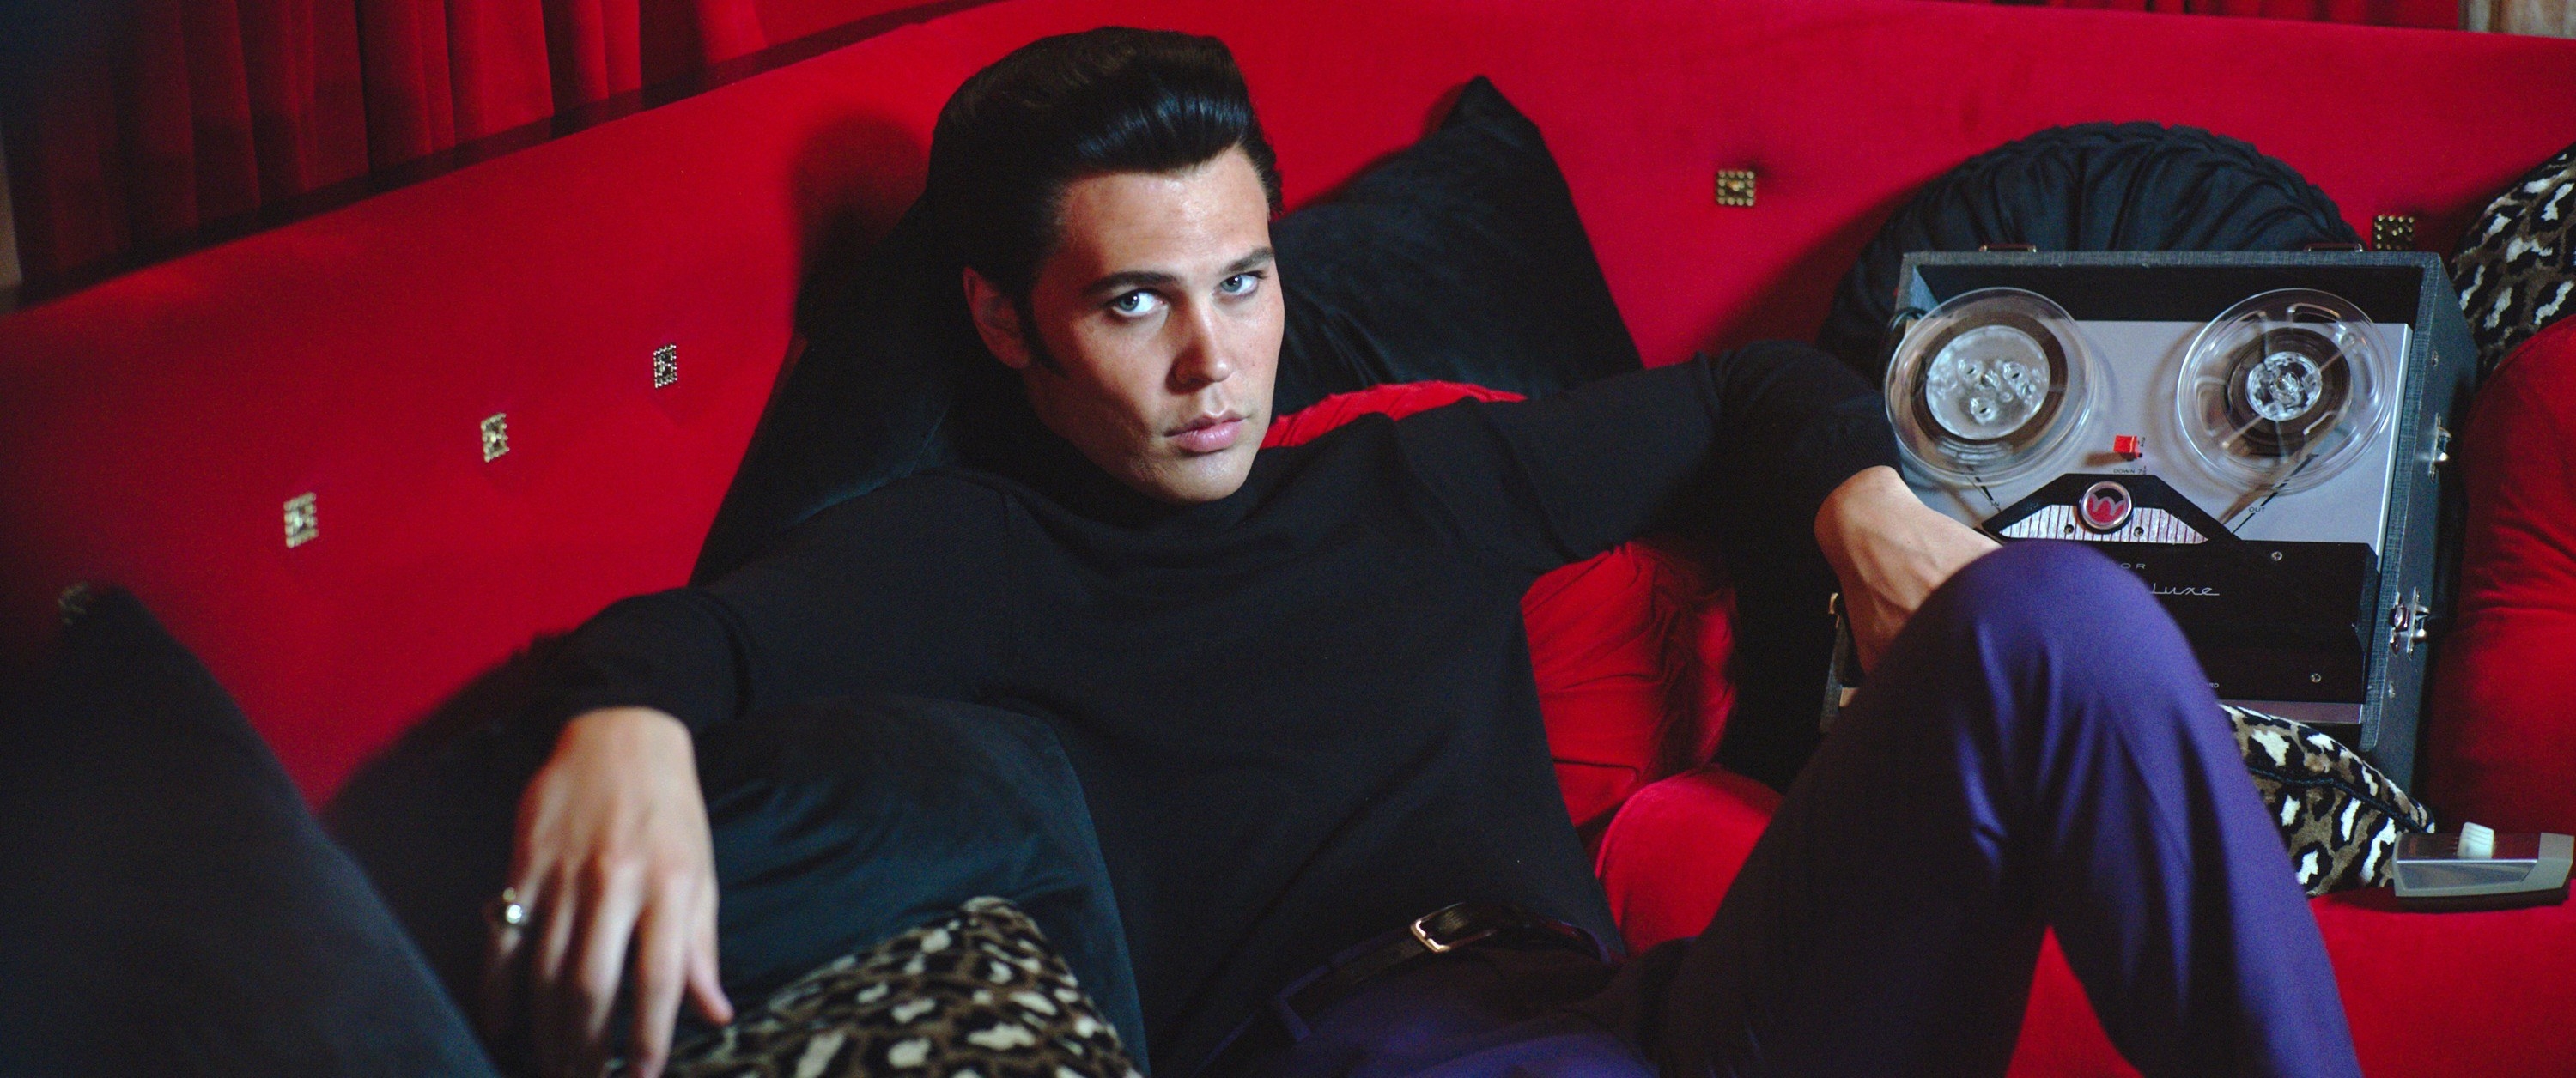 Austin as Elvis lounging on a couch while wearing a turtleneck and slacks